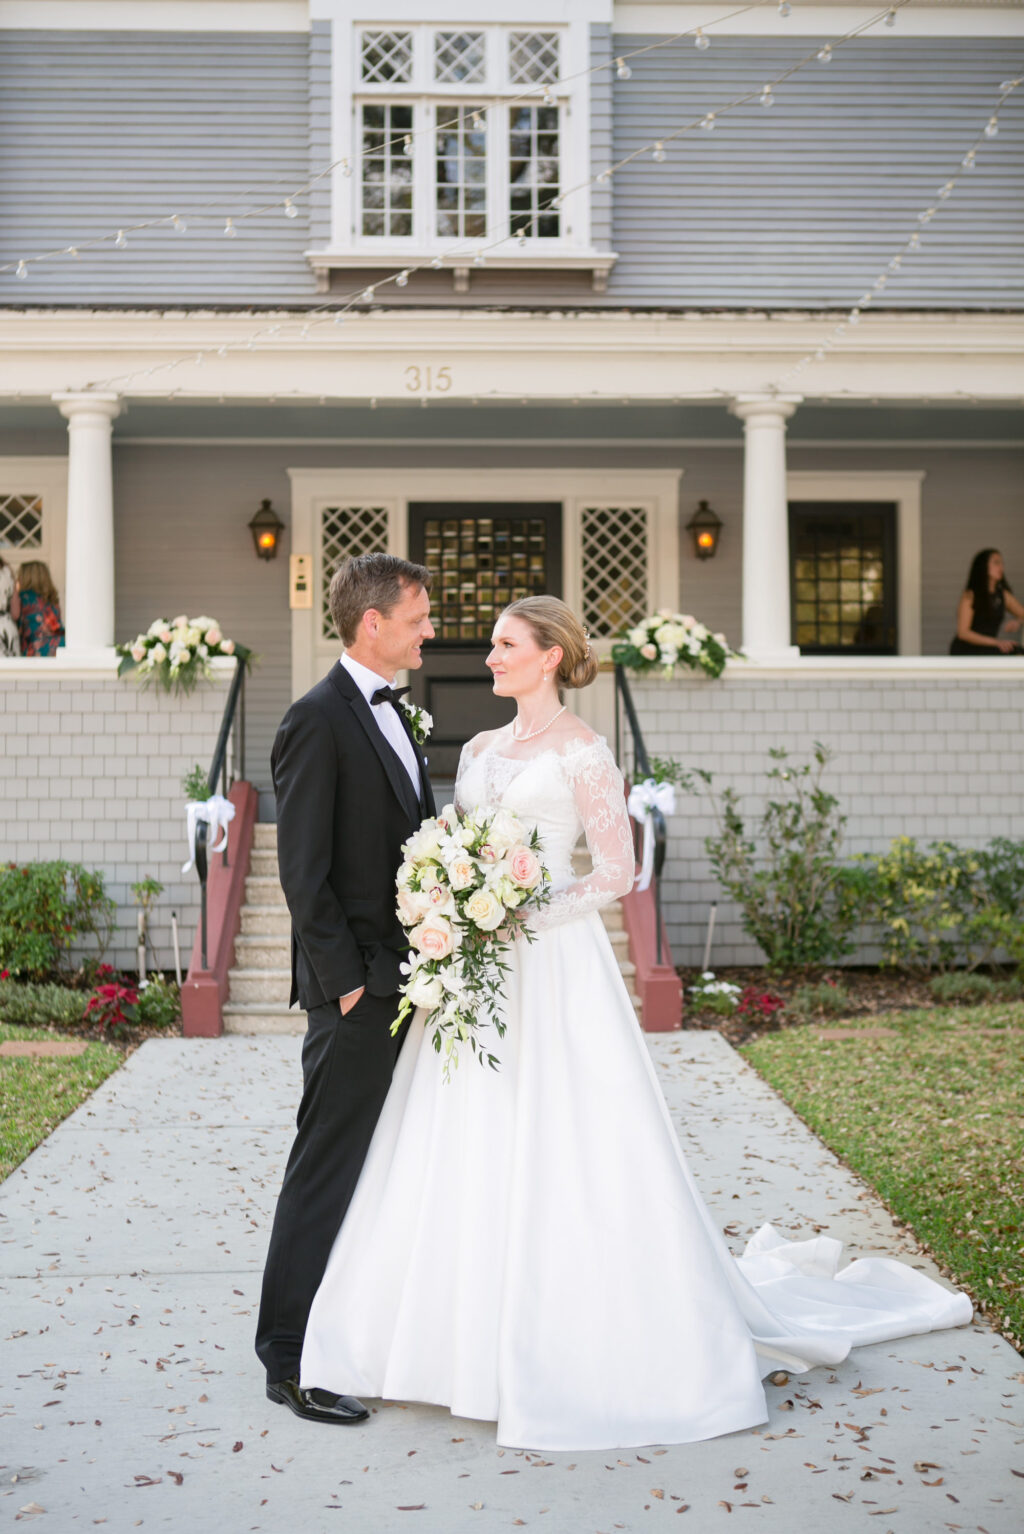 Bride and Groom Wedding Reception Portrait | South Tampa Wedding Venue The Orlo | Photographer Carrie Wildes Photography